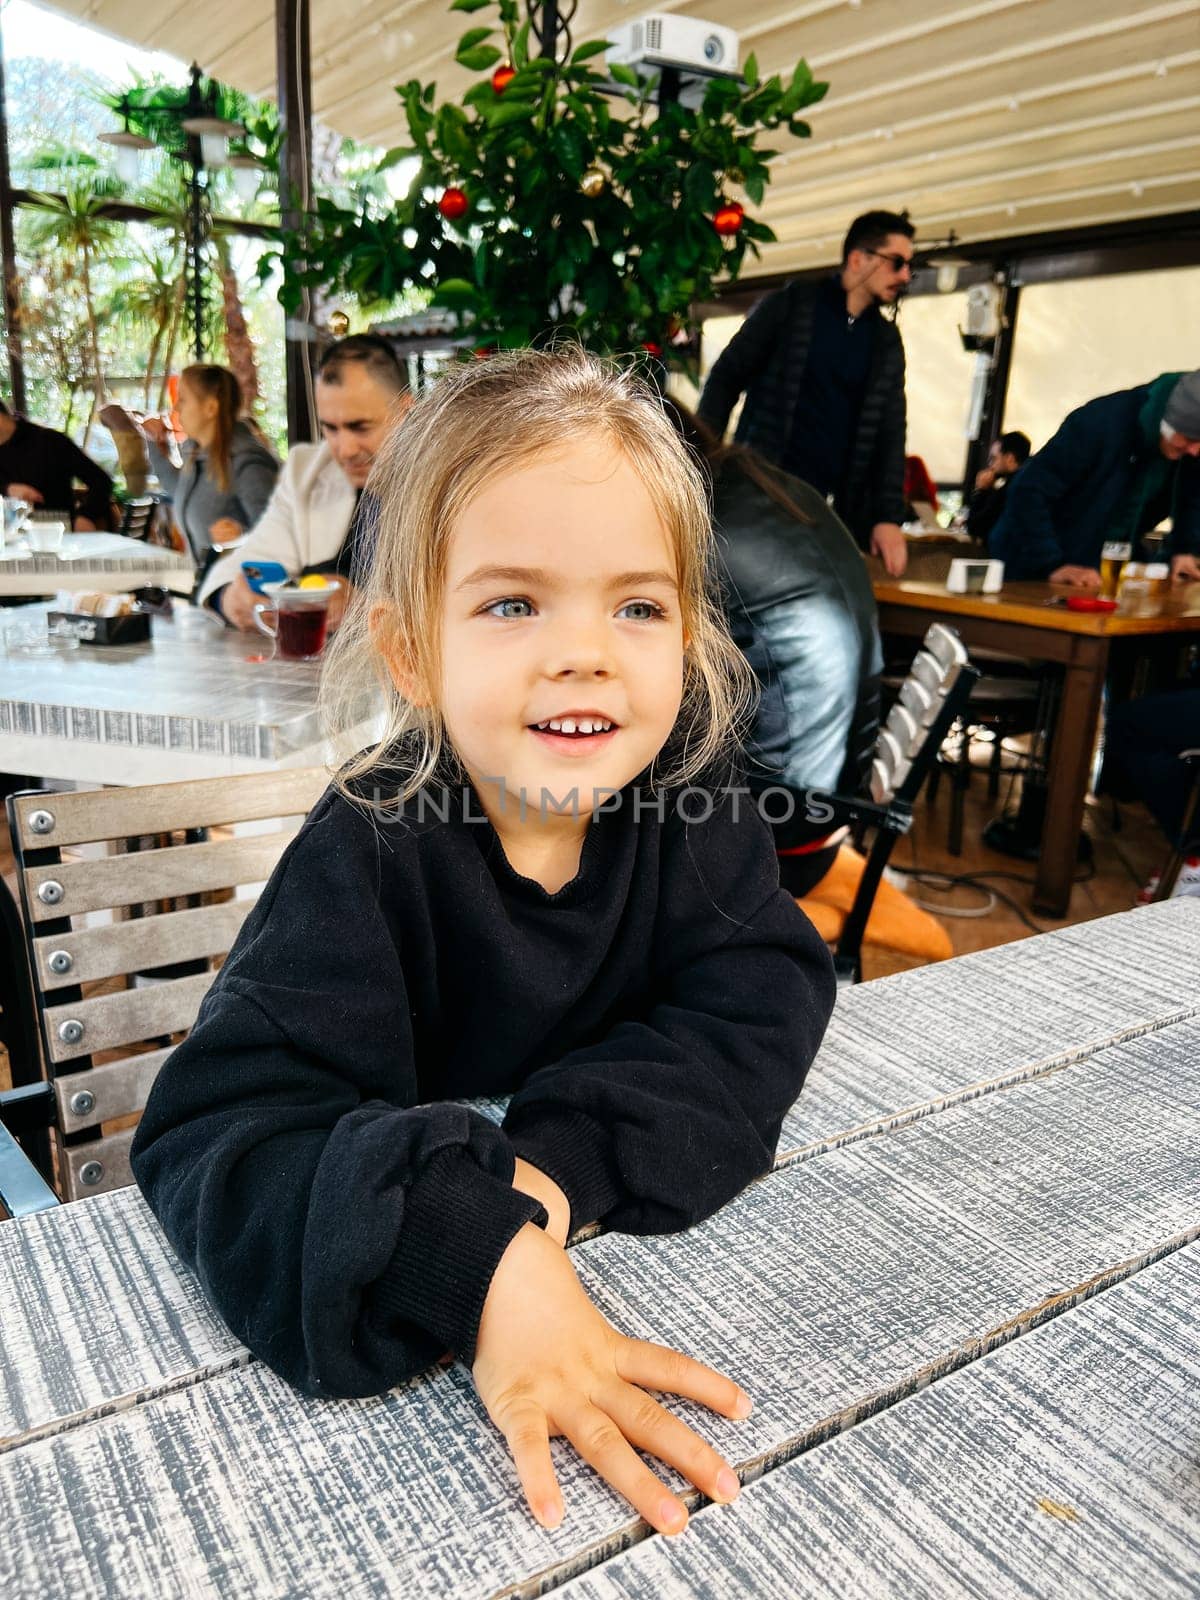 Budva, Montenegro - 25 december 2022: Little smiling girl sitting at a table in a restaurant by Nadtochiy